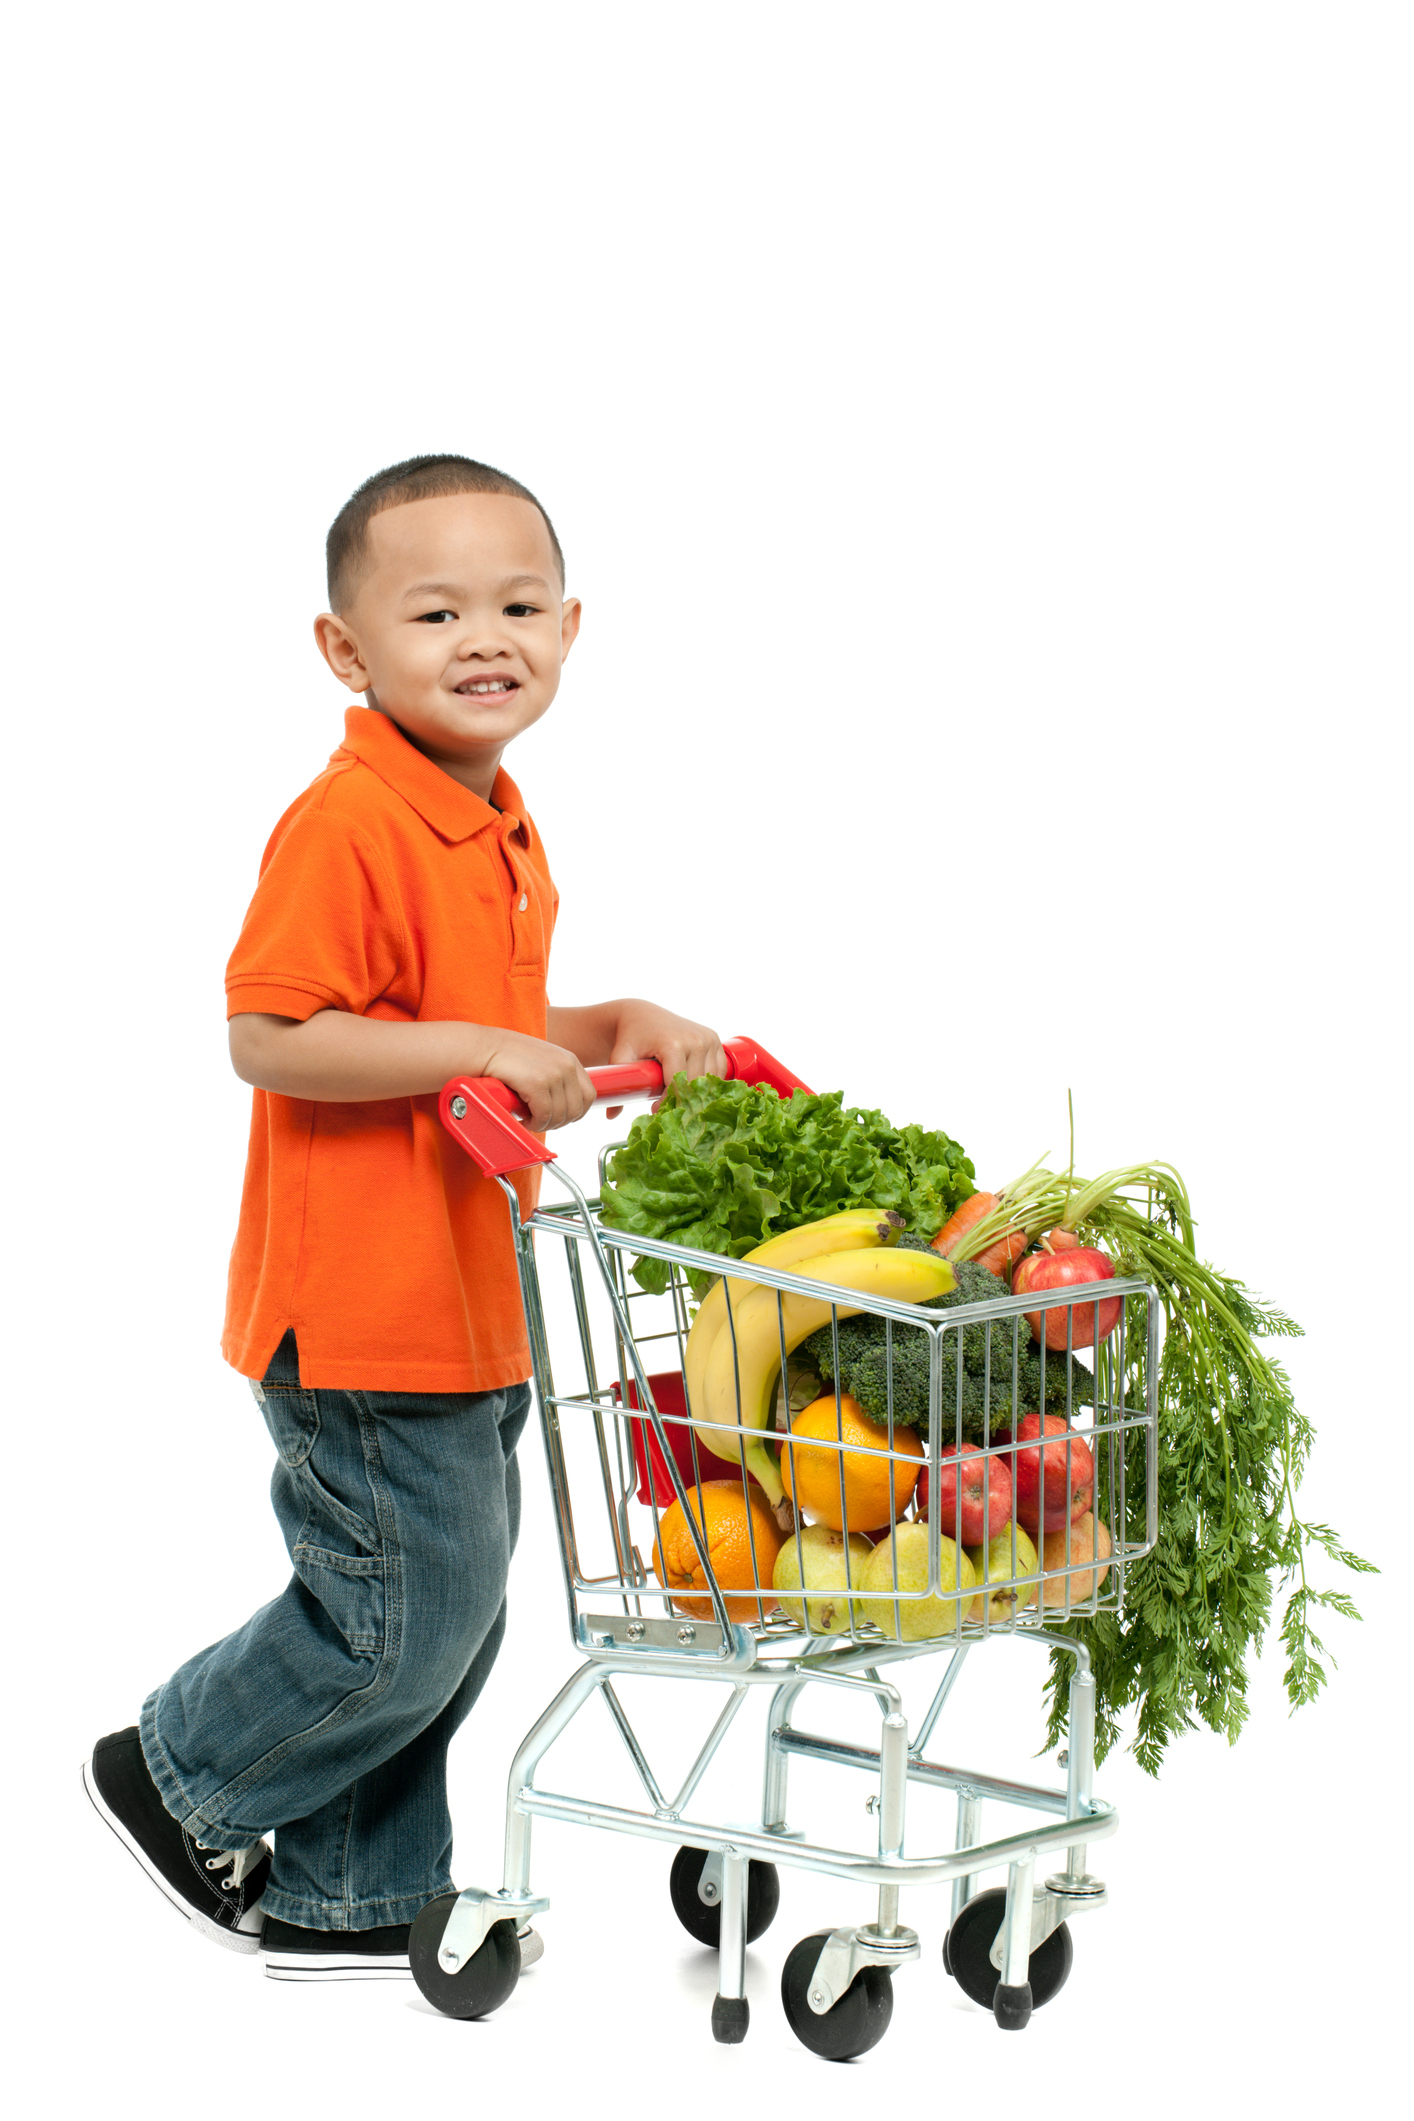 Child with Shopping Cart.jpg